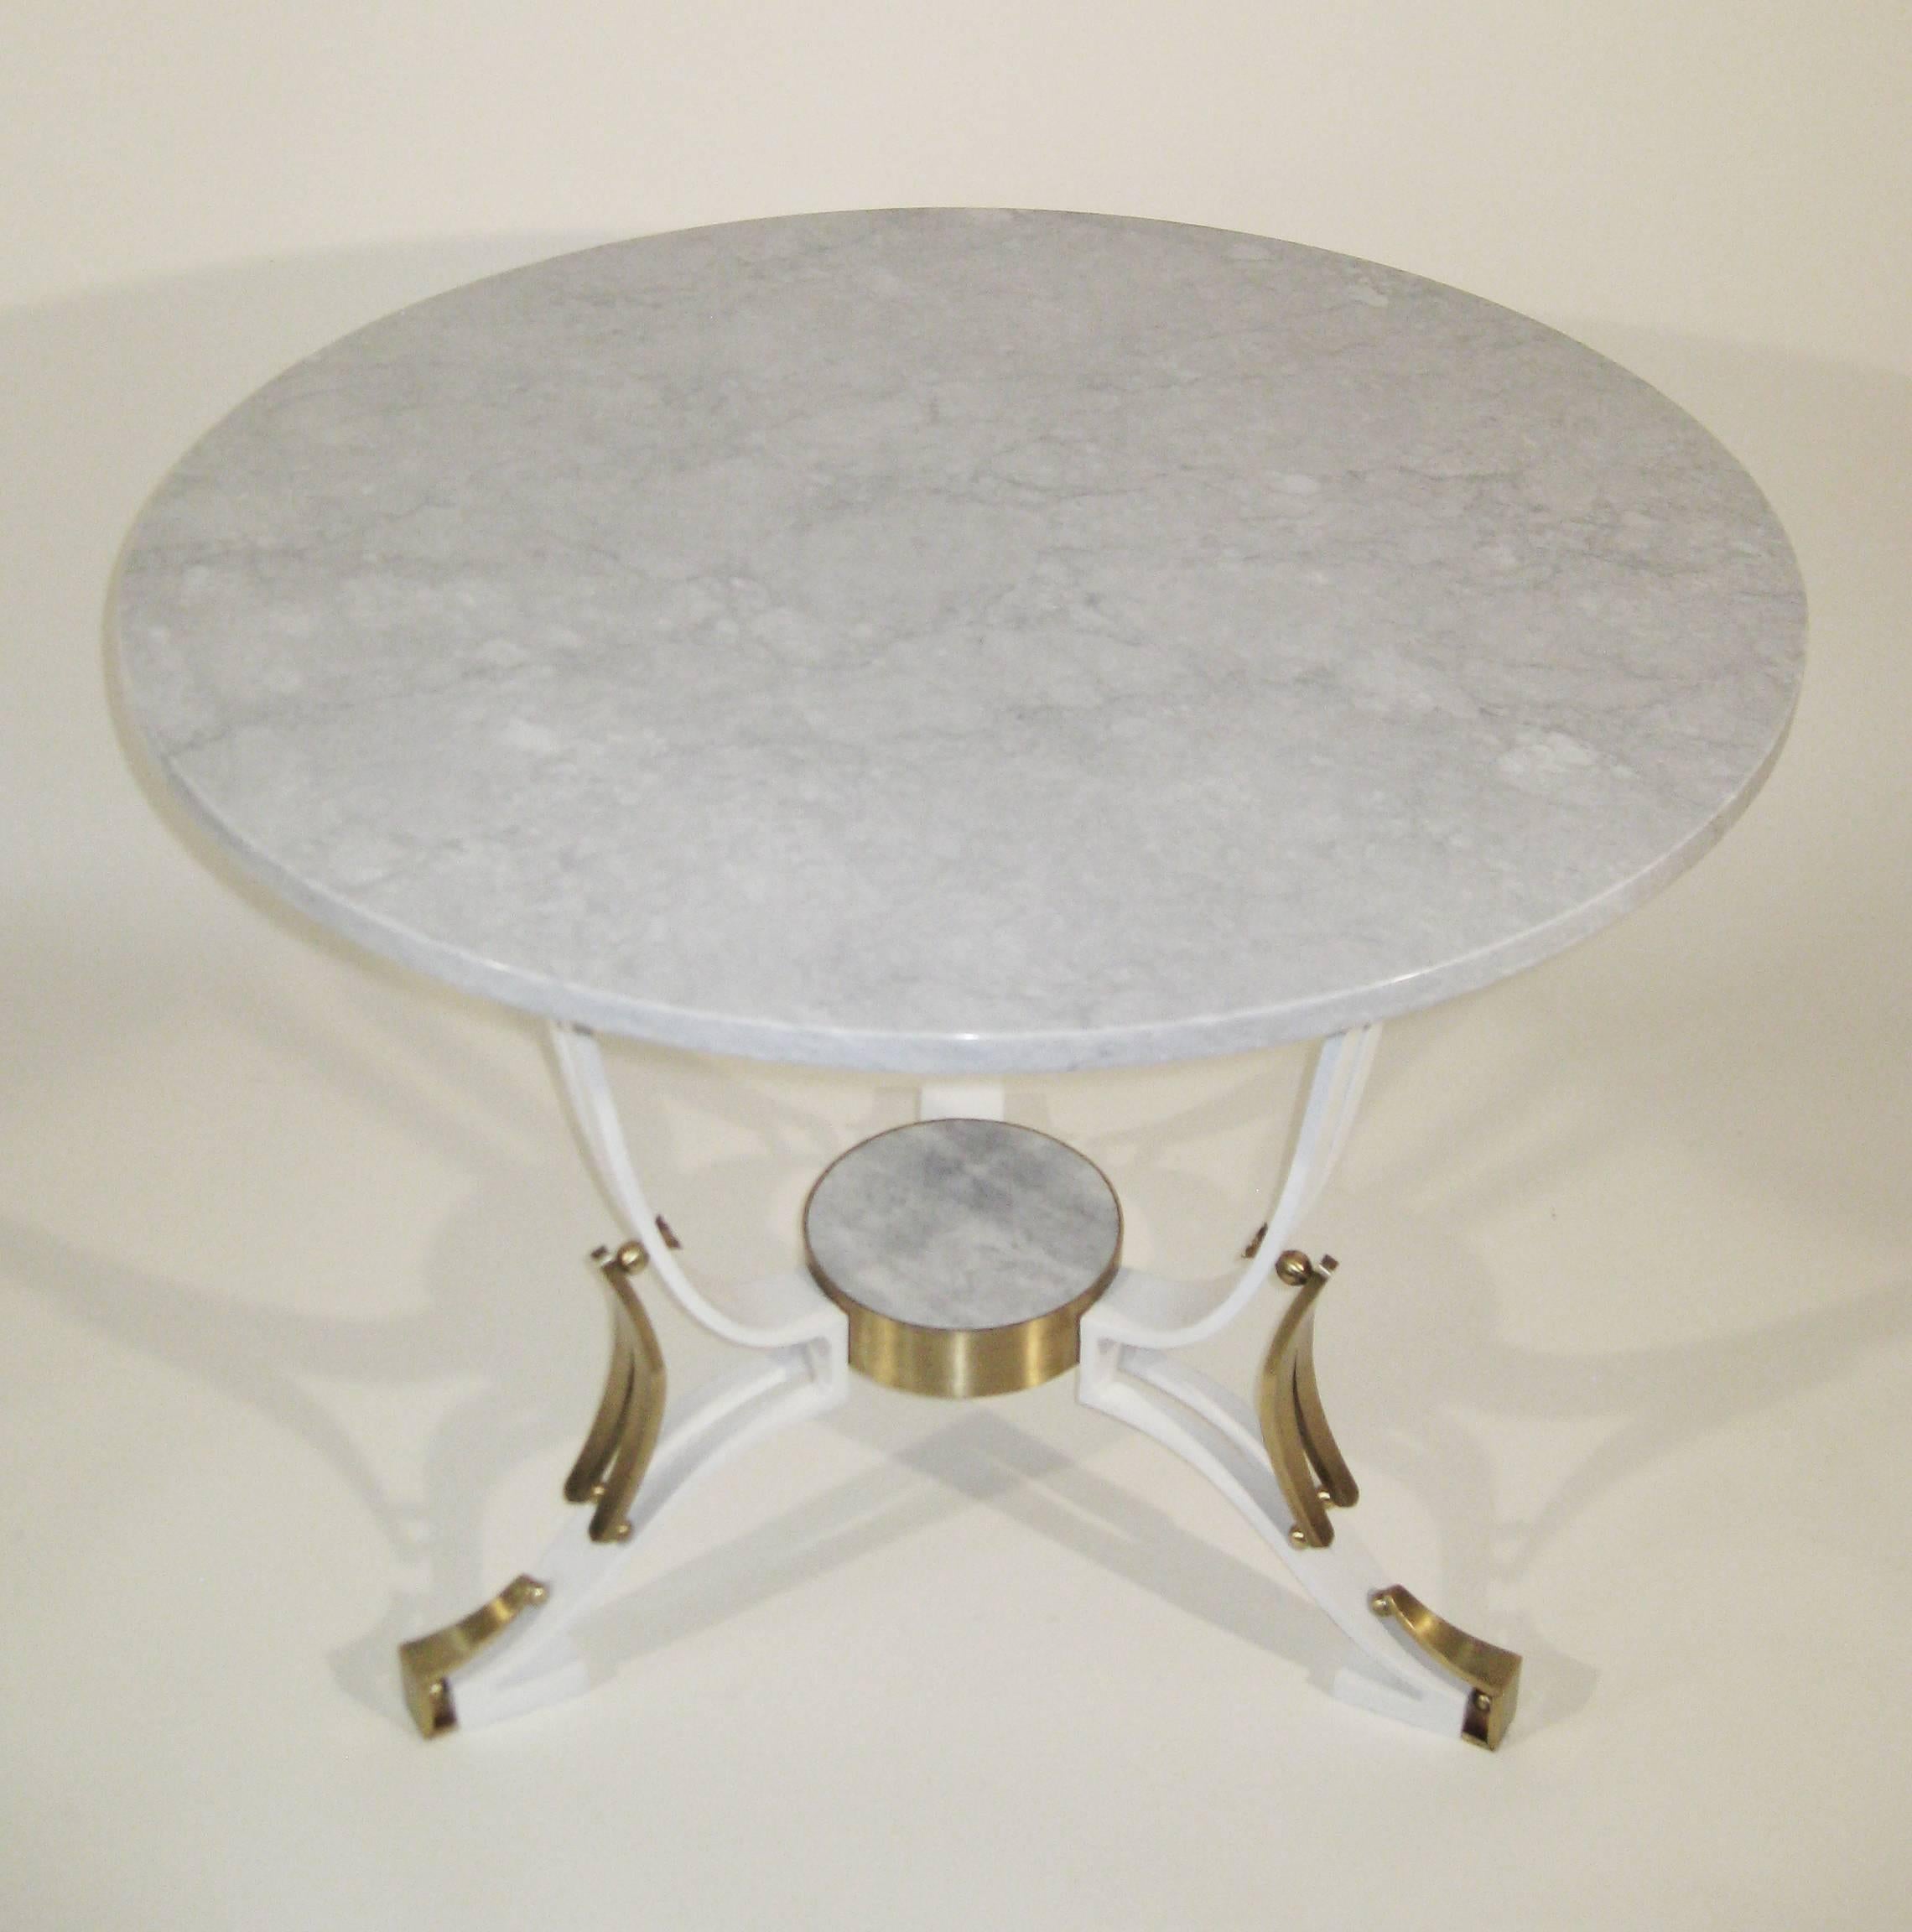 With an unusual white lacquered finish, this substantial yet light and elegant table is finished off with bronze flourishes and a white Carrara marble top, circa 1940.

Born in France, Roberto y Mito Block emigrated to Mexico in the late 1930s.